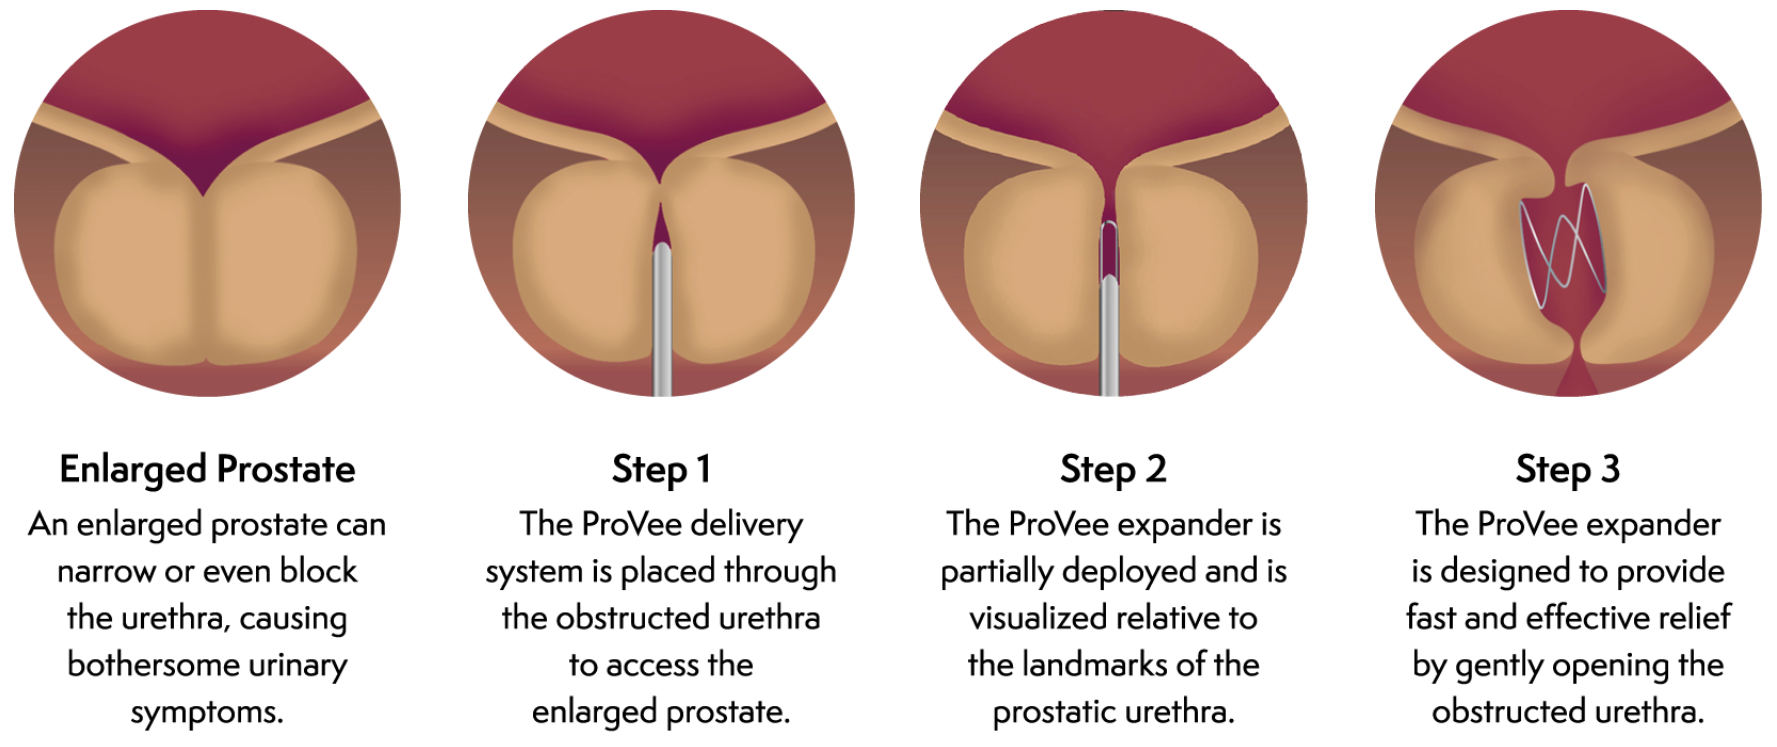 an illustration, in four images, showing how the ProVee delivery system inserts ProVerum's device into the enlarged prostate where the expander provides relief by gently opening the obstructed urethra